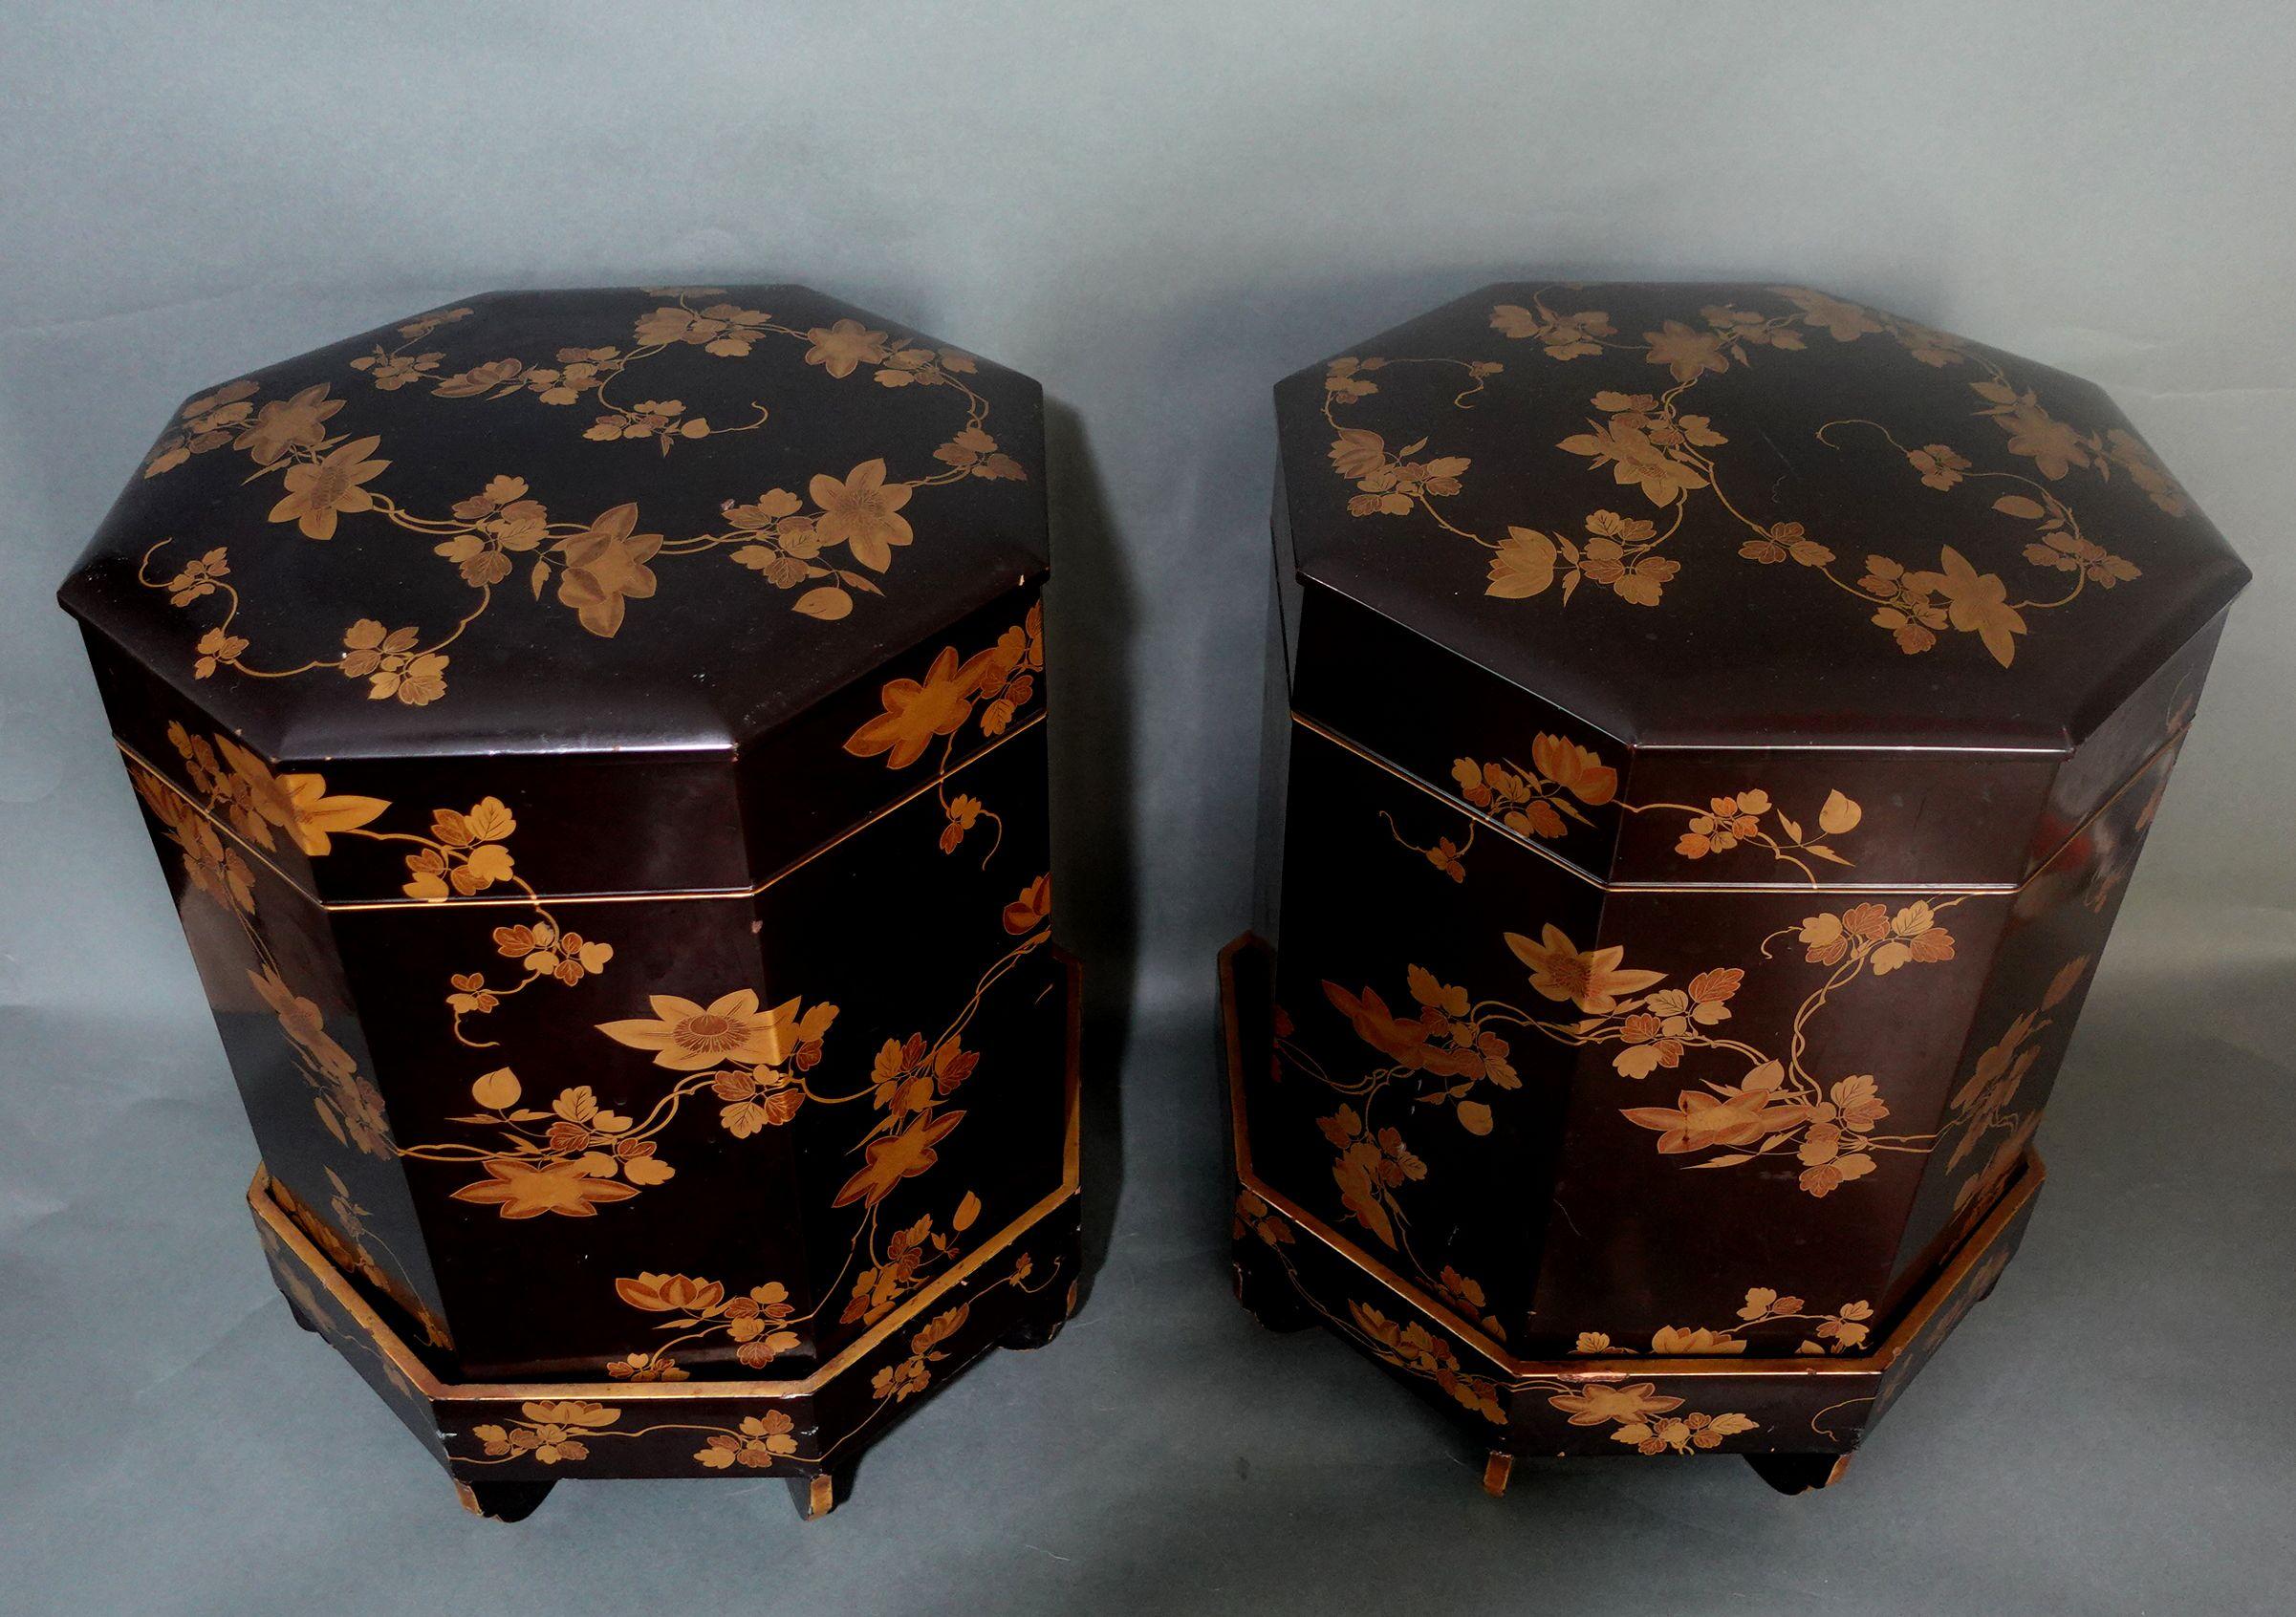 Japan, late Edo, two big octagonal covered shell game boxes resting on footed stands, with makie-e decorations depicting flowering vines on a black lacquer ground,
They are still in very good original condition with some small nicks by the use and